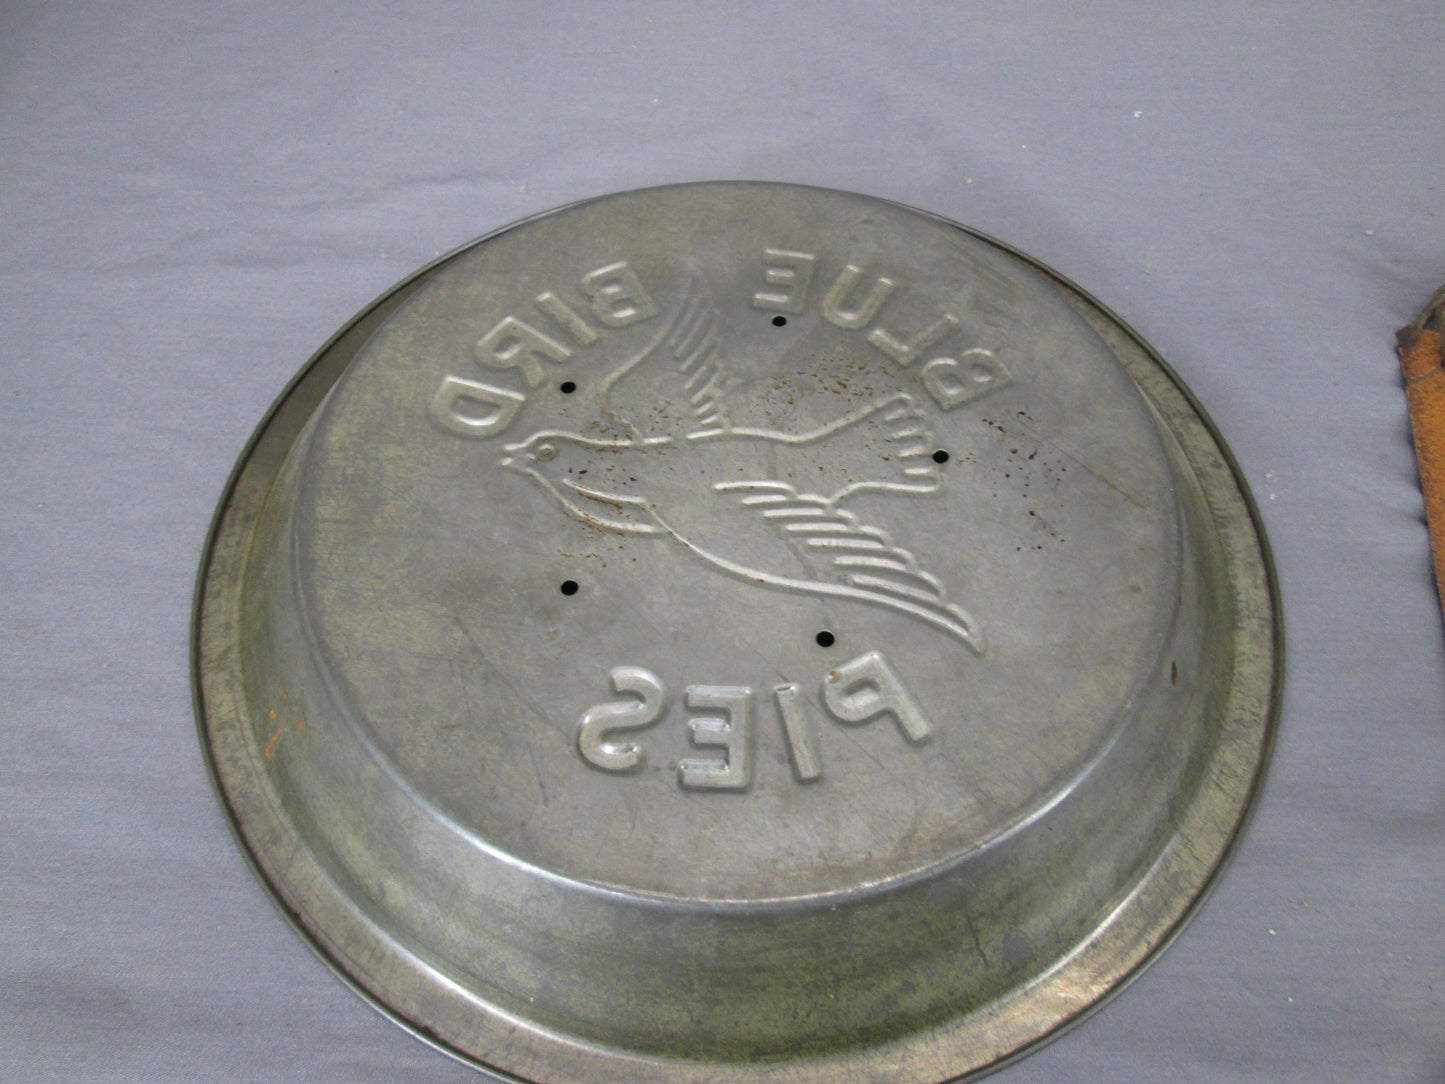 0133 - Old Metal Open/Close Sign Old Pie Tin